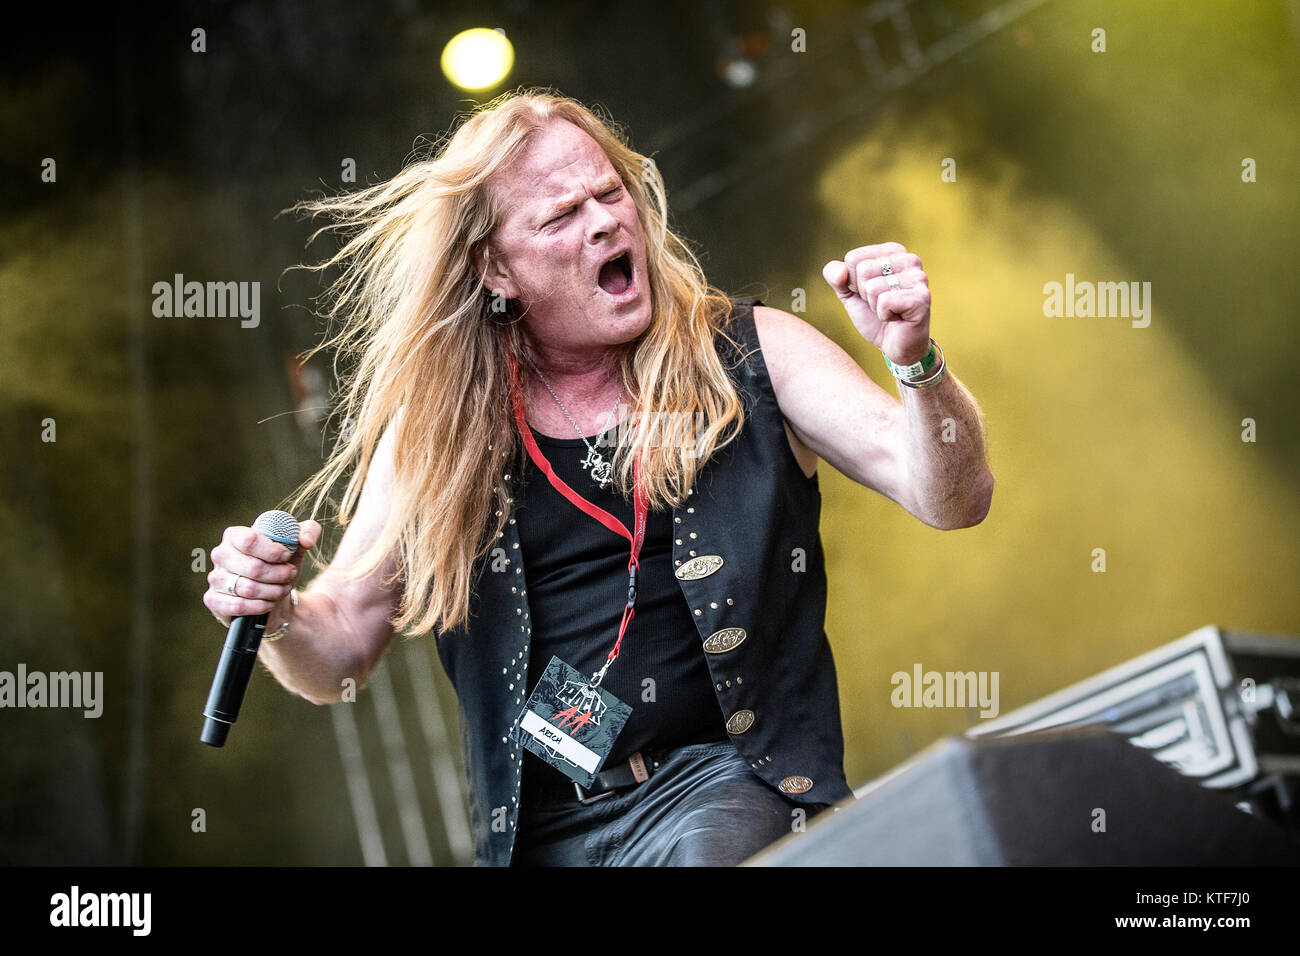 The Norwegian power metal band Artch performs a live concert at the Norwegian music festival Tons of Rock 2015. Here vocalist Eric Hawk is seen live on stage. Norway, 20/06 2015. Stock Photo